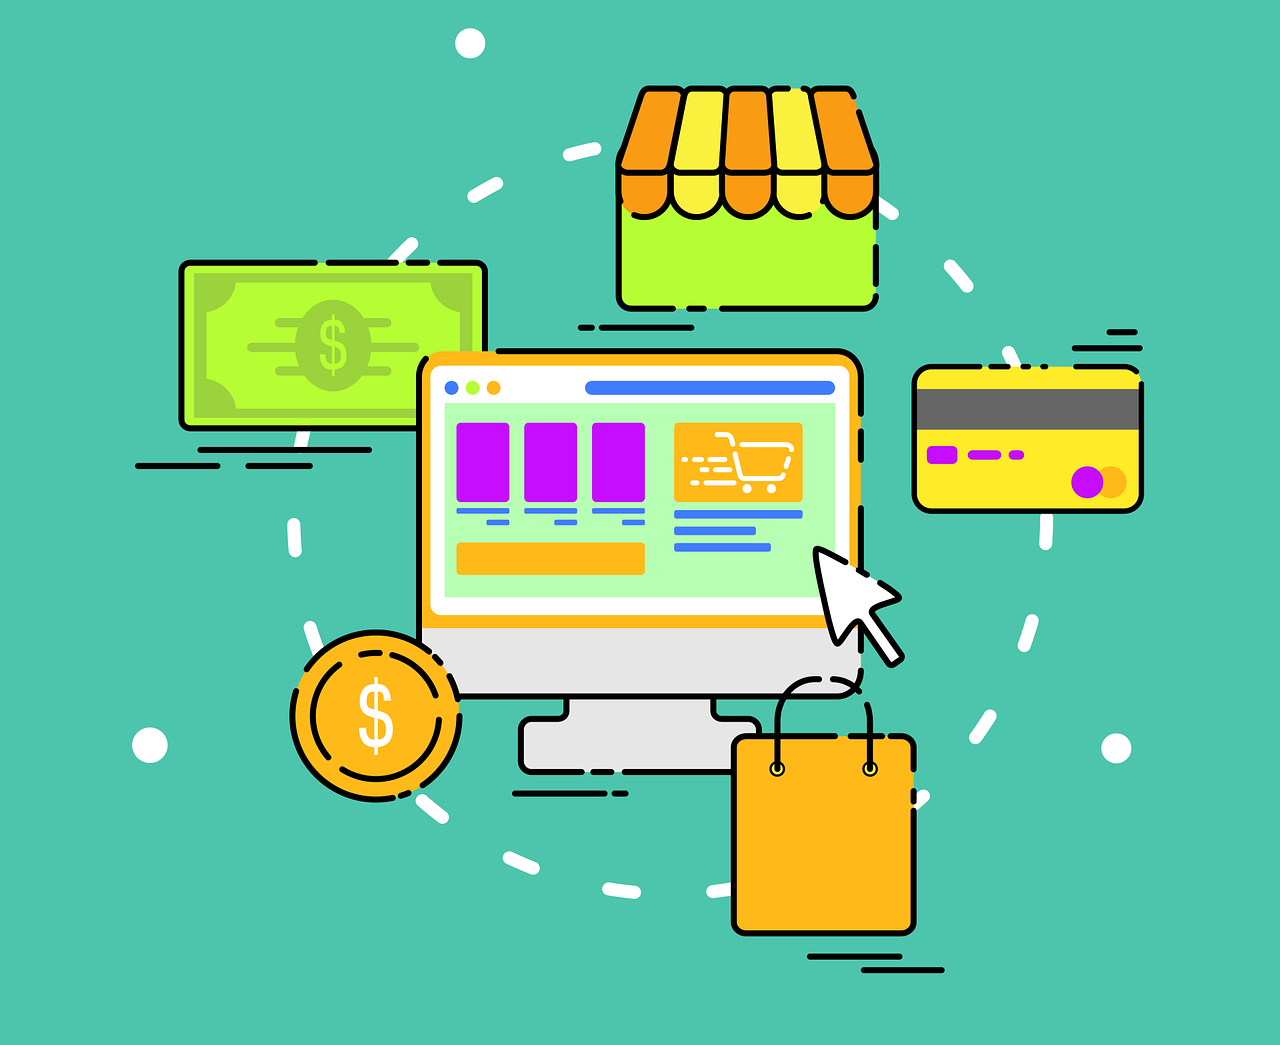 Cartoon computer screen surrounded by dollar bill, coin, shopping bag, storefront, and credit card to symbolize payment gateway